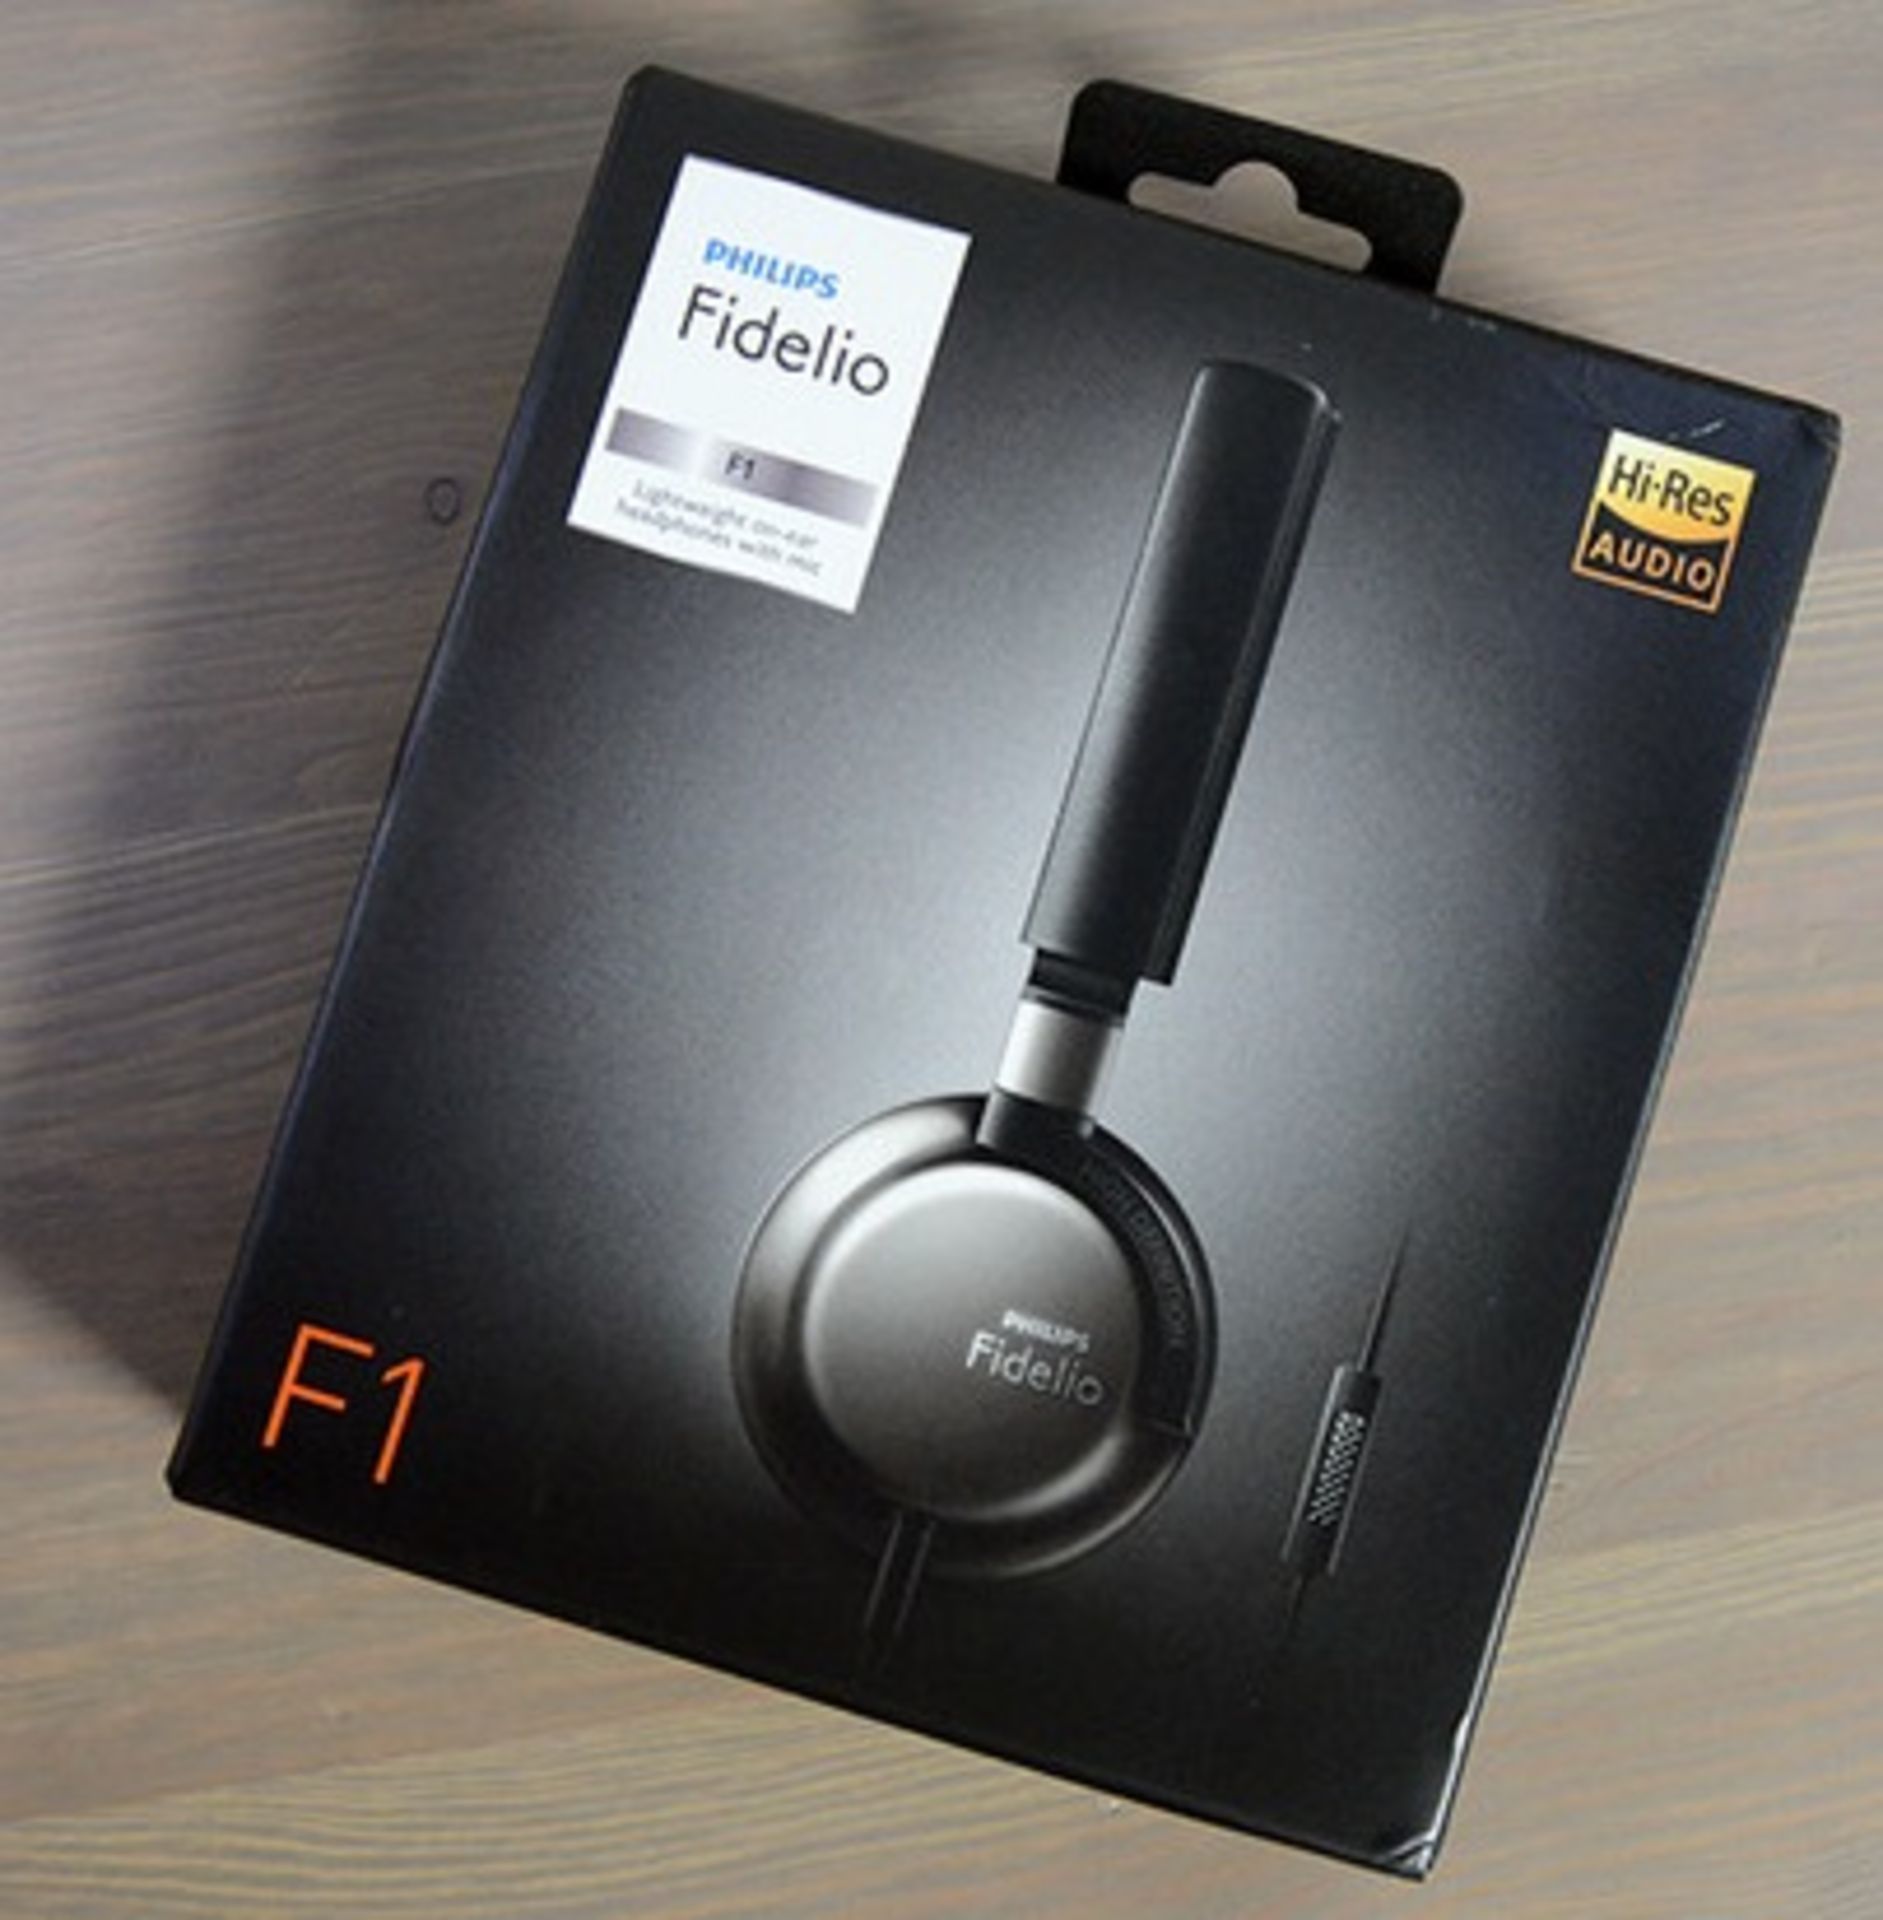 V Brand New Philips Fidelio F1 Lightweight On-Ear Headphones With Microphone With Hi-Res Audio